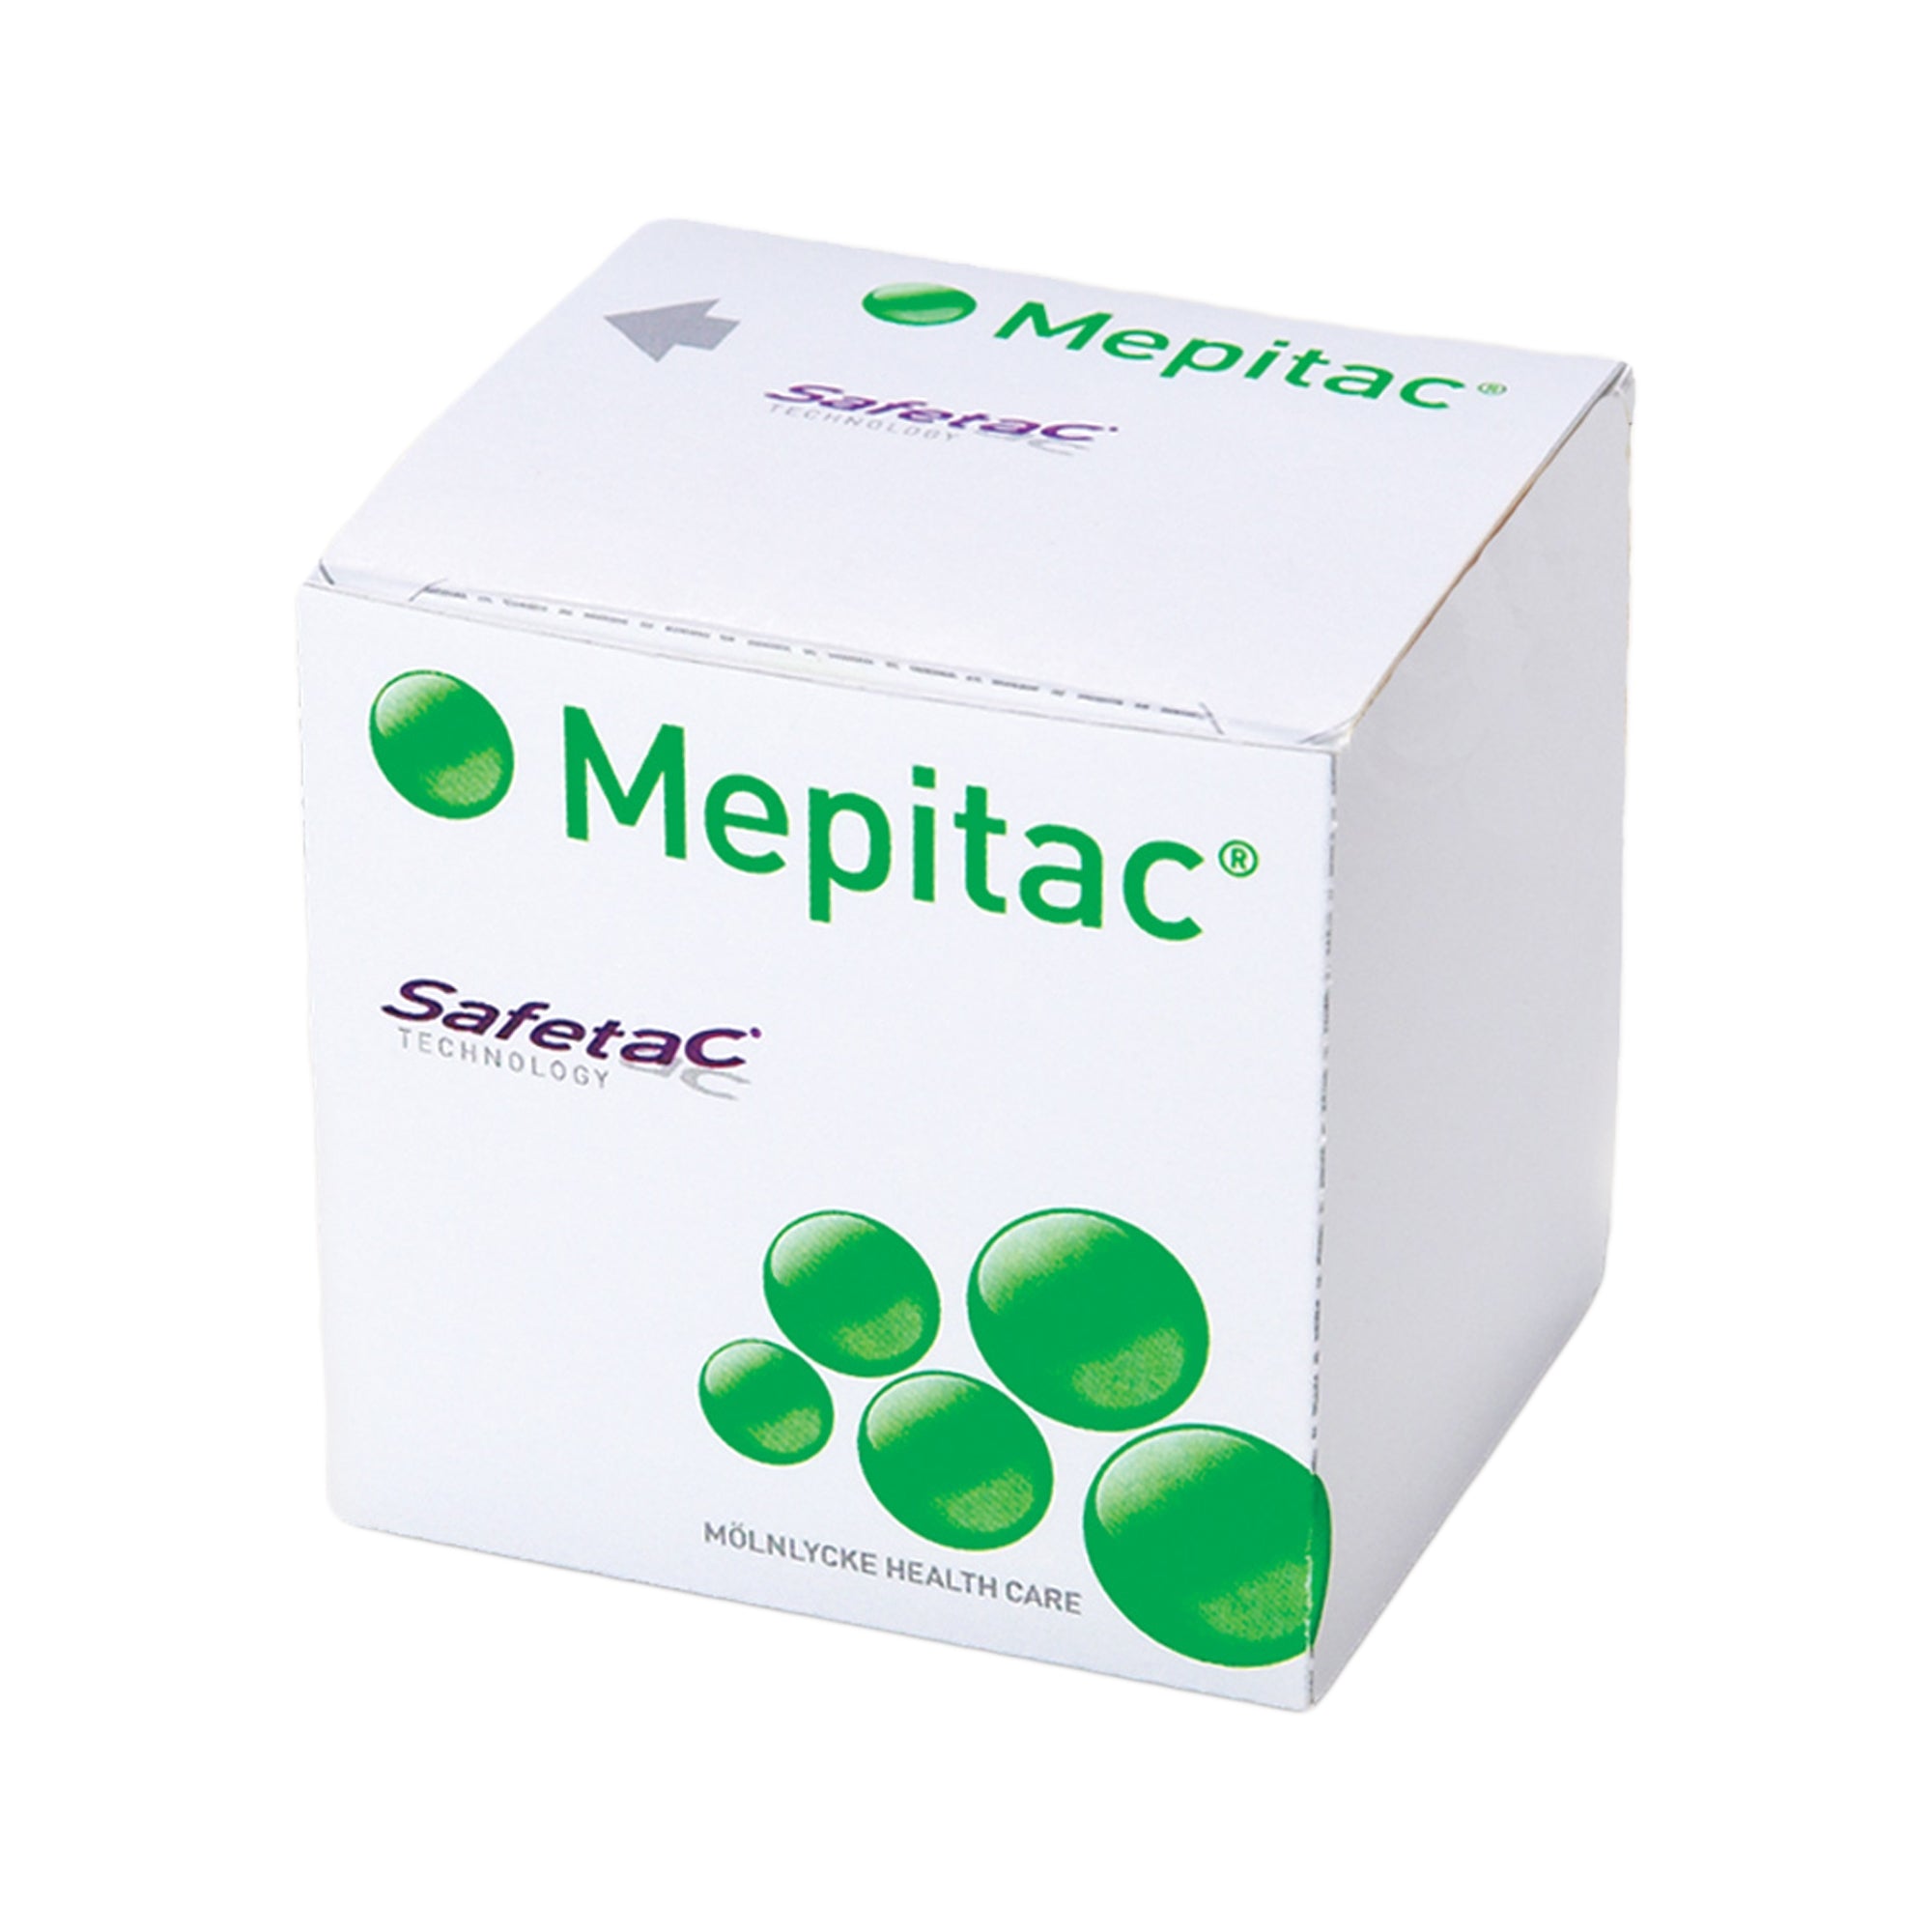 Molnlycke Mepitac Medical Tape 298400 - Silicone, NonSterile, Moisture Proof, Breathable, Tan, Roll - 1 1/2" x 59", One Roll